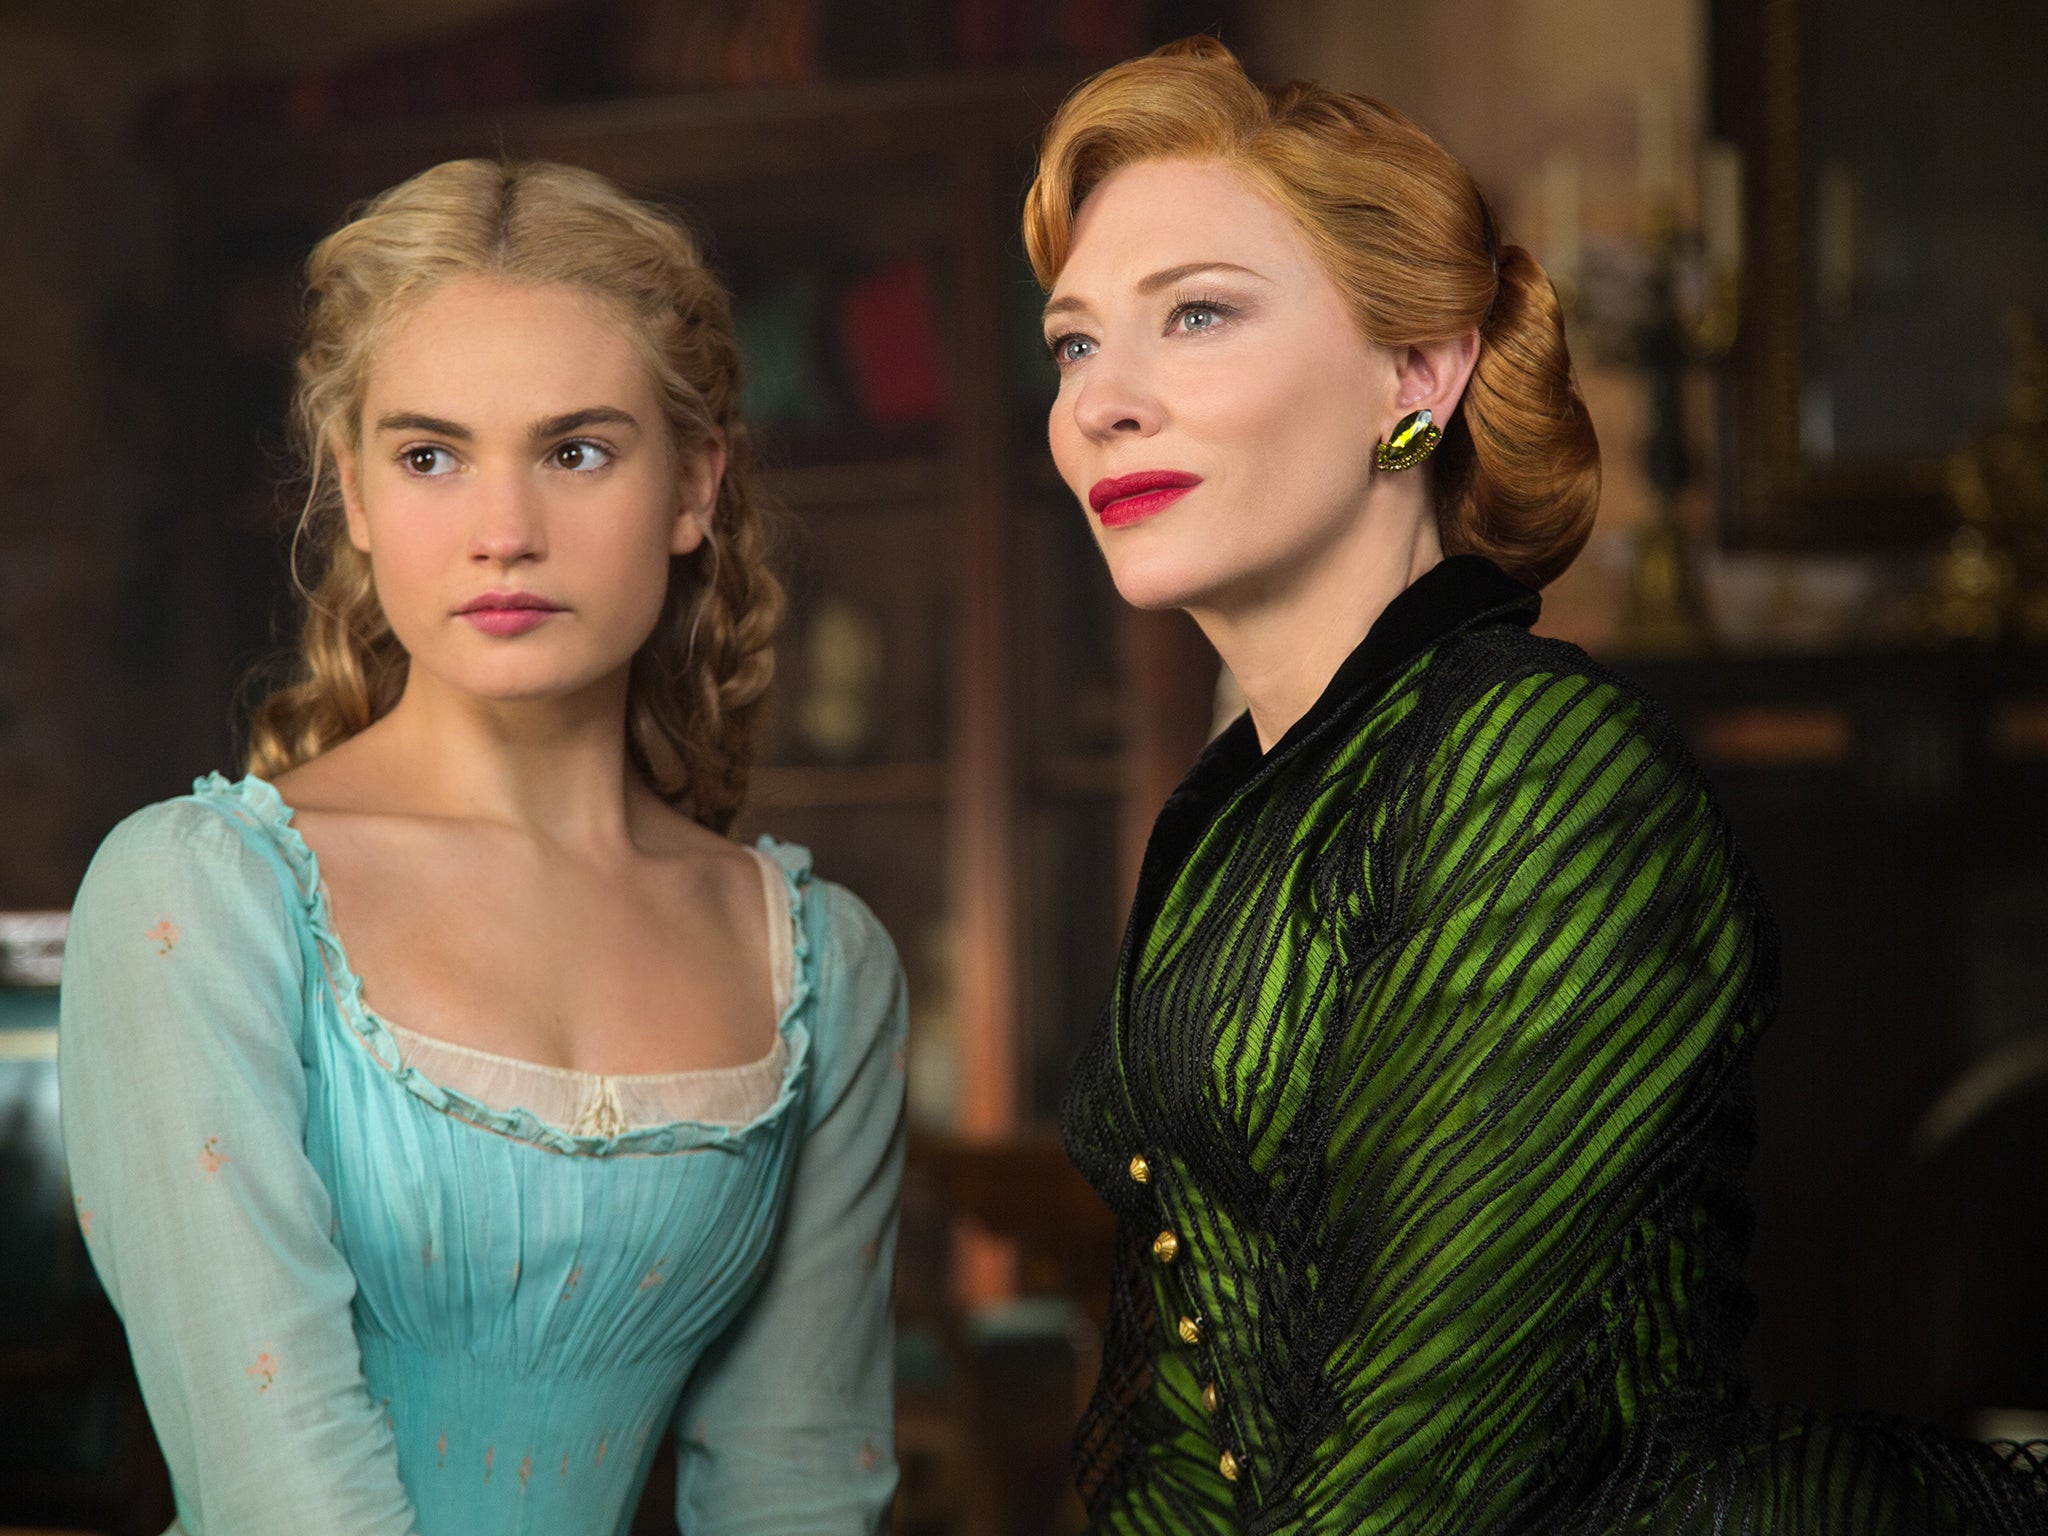 Lily James Style Interview on Dressing Up in Cinderella Costumes